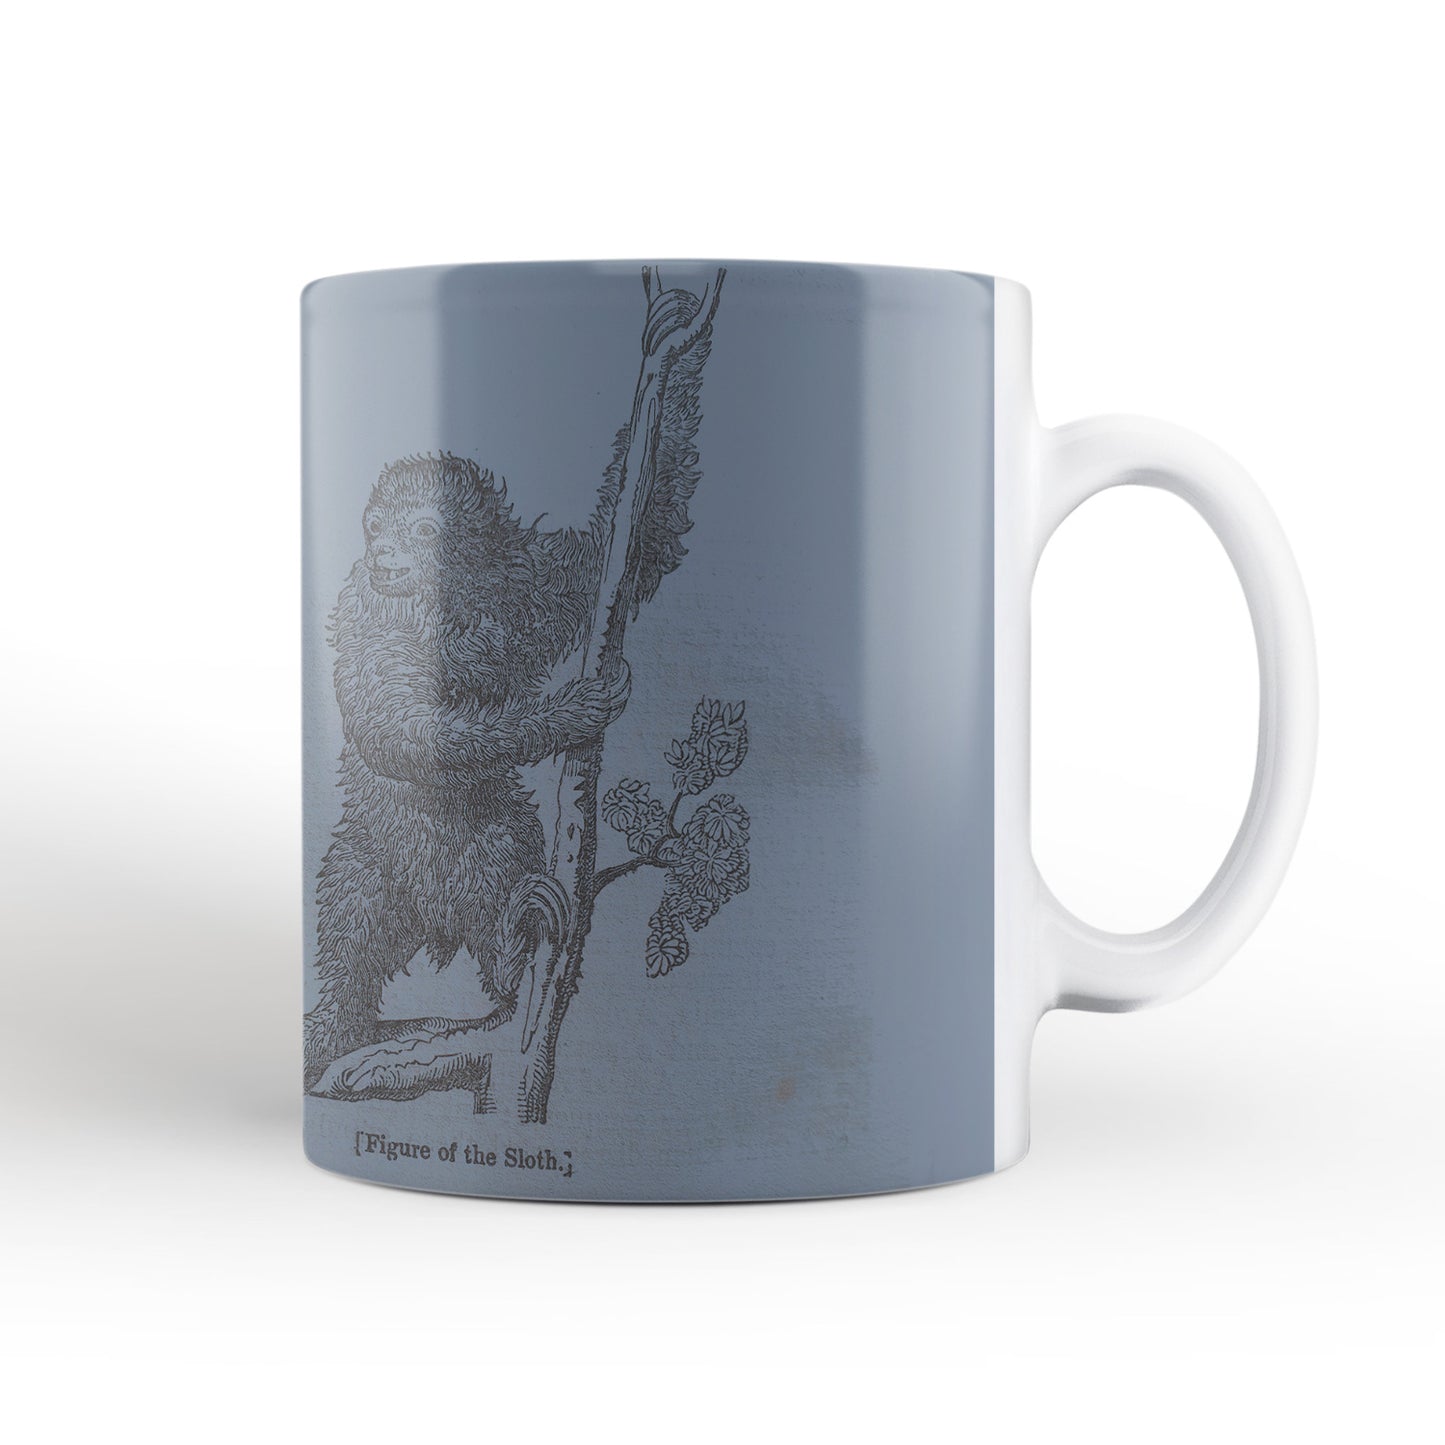 Blue Sloth Mug from The Penny Cyclopædia (1833 to 1843), Leighton Library